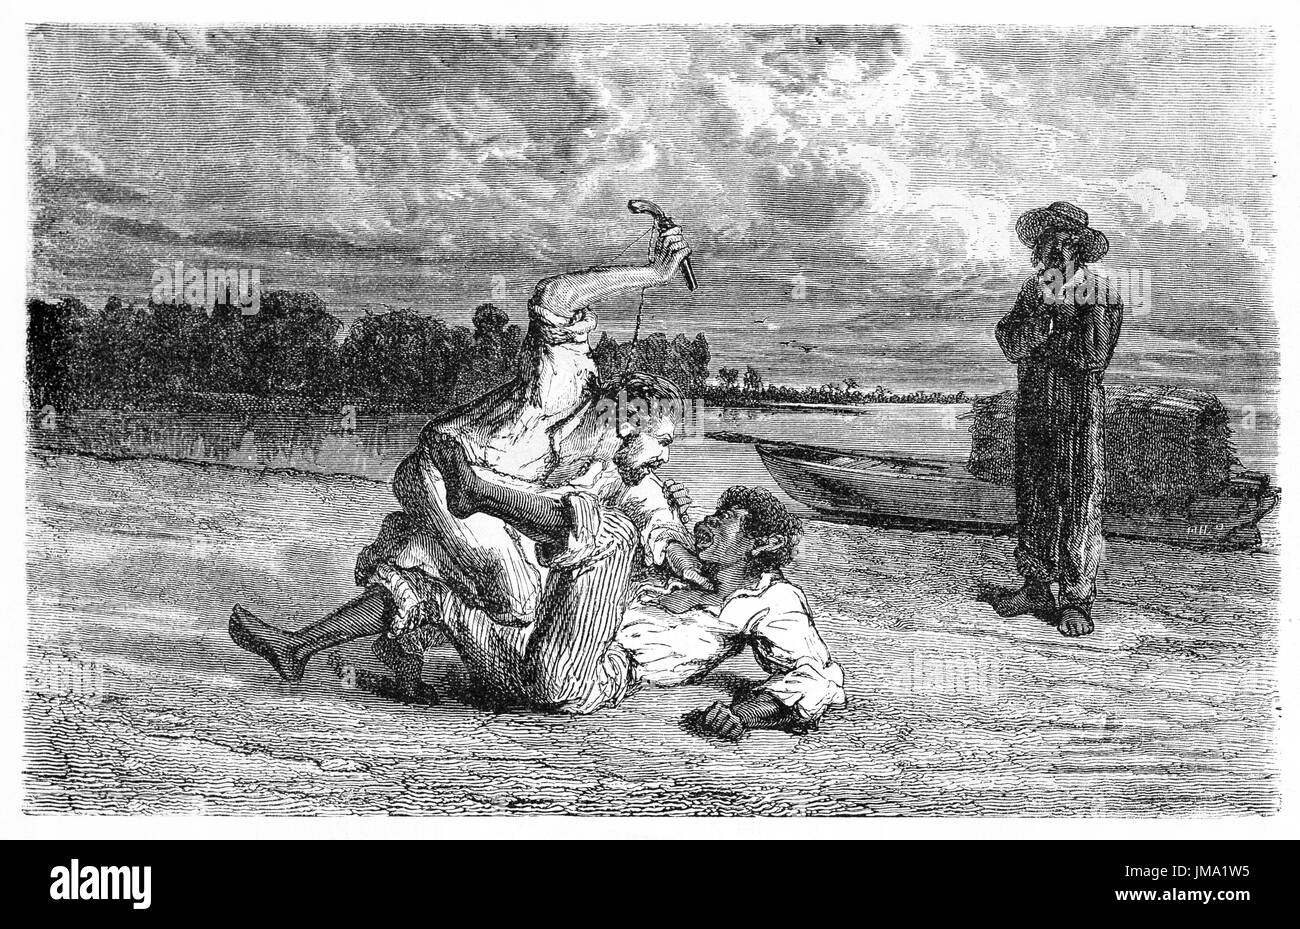 Old illustration of two man coming to blows on Amazon river bank. Created by Riou, published on Le Tour du Monde, Paris, 1861. Stock Photo